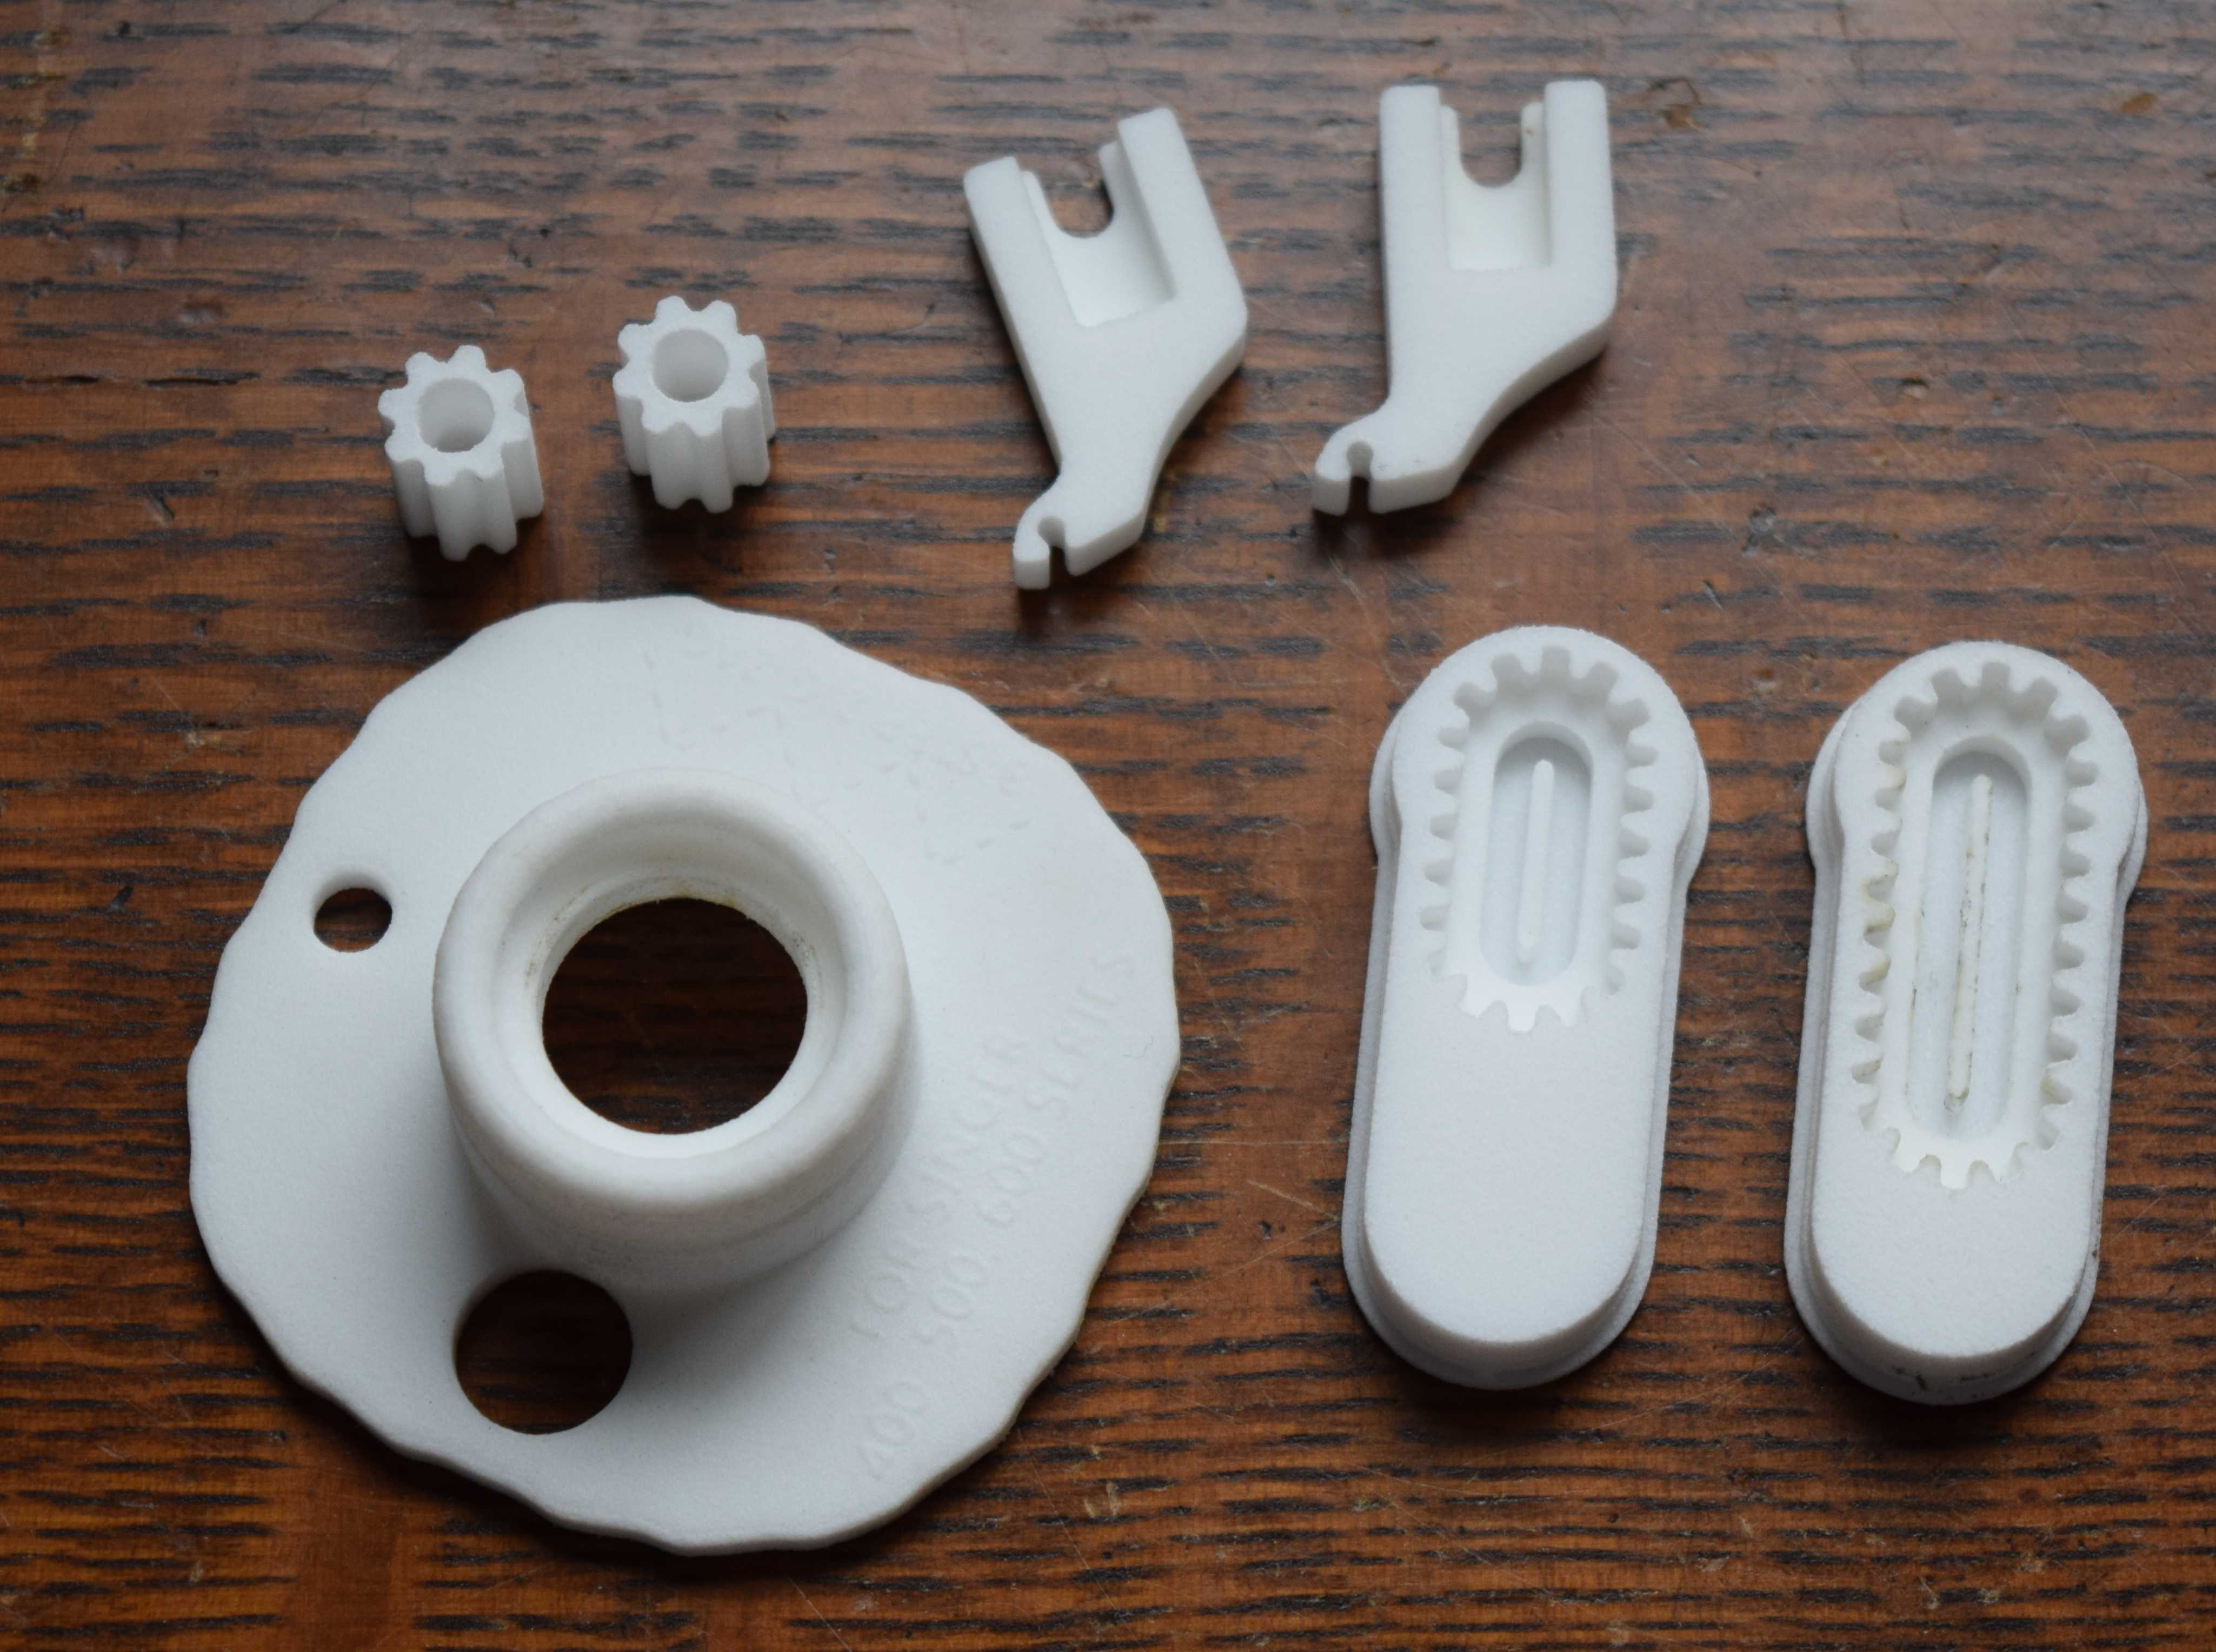 3d Printed Sewing Machine Parts Grow Your Own Clothes